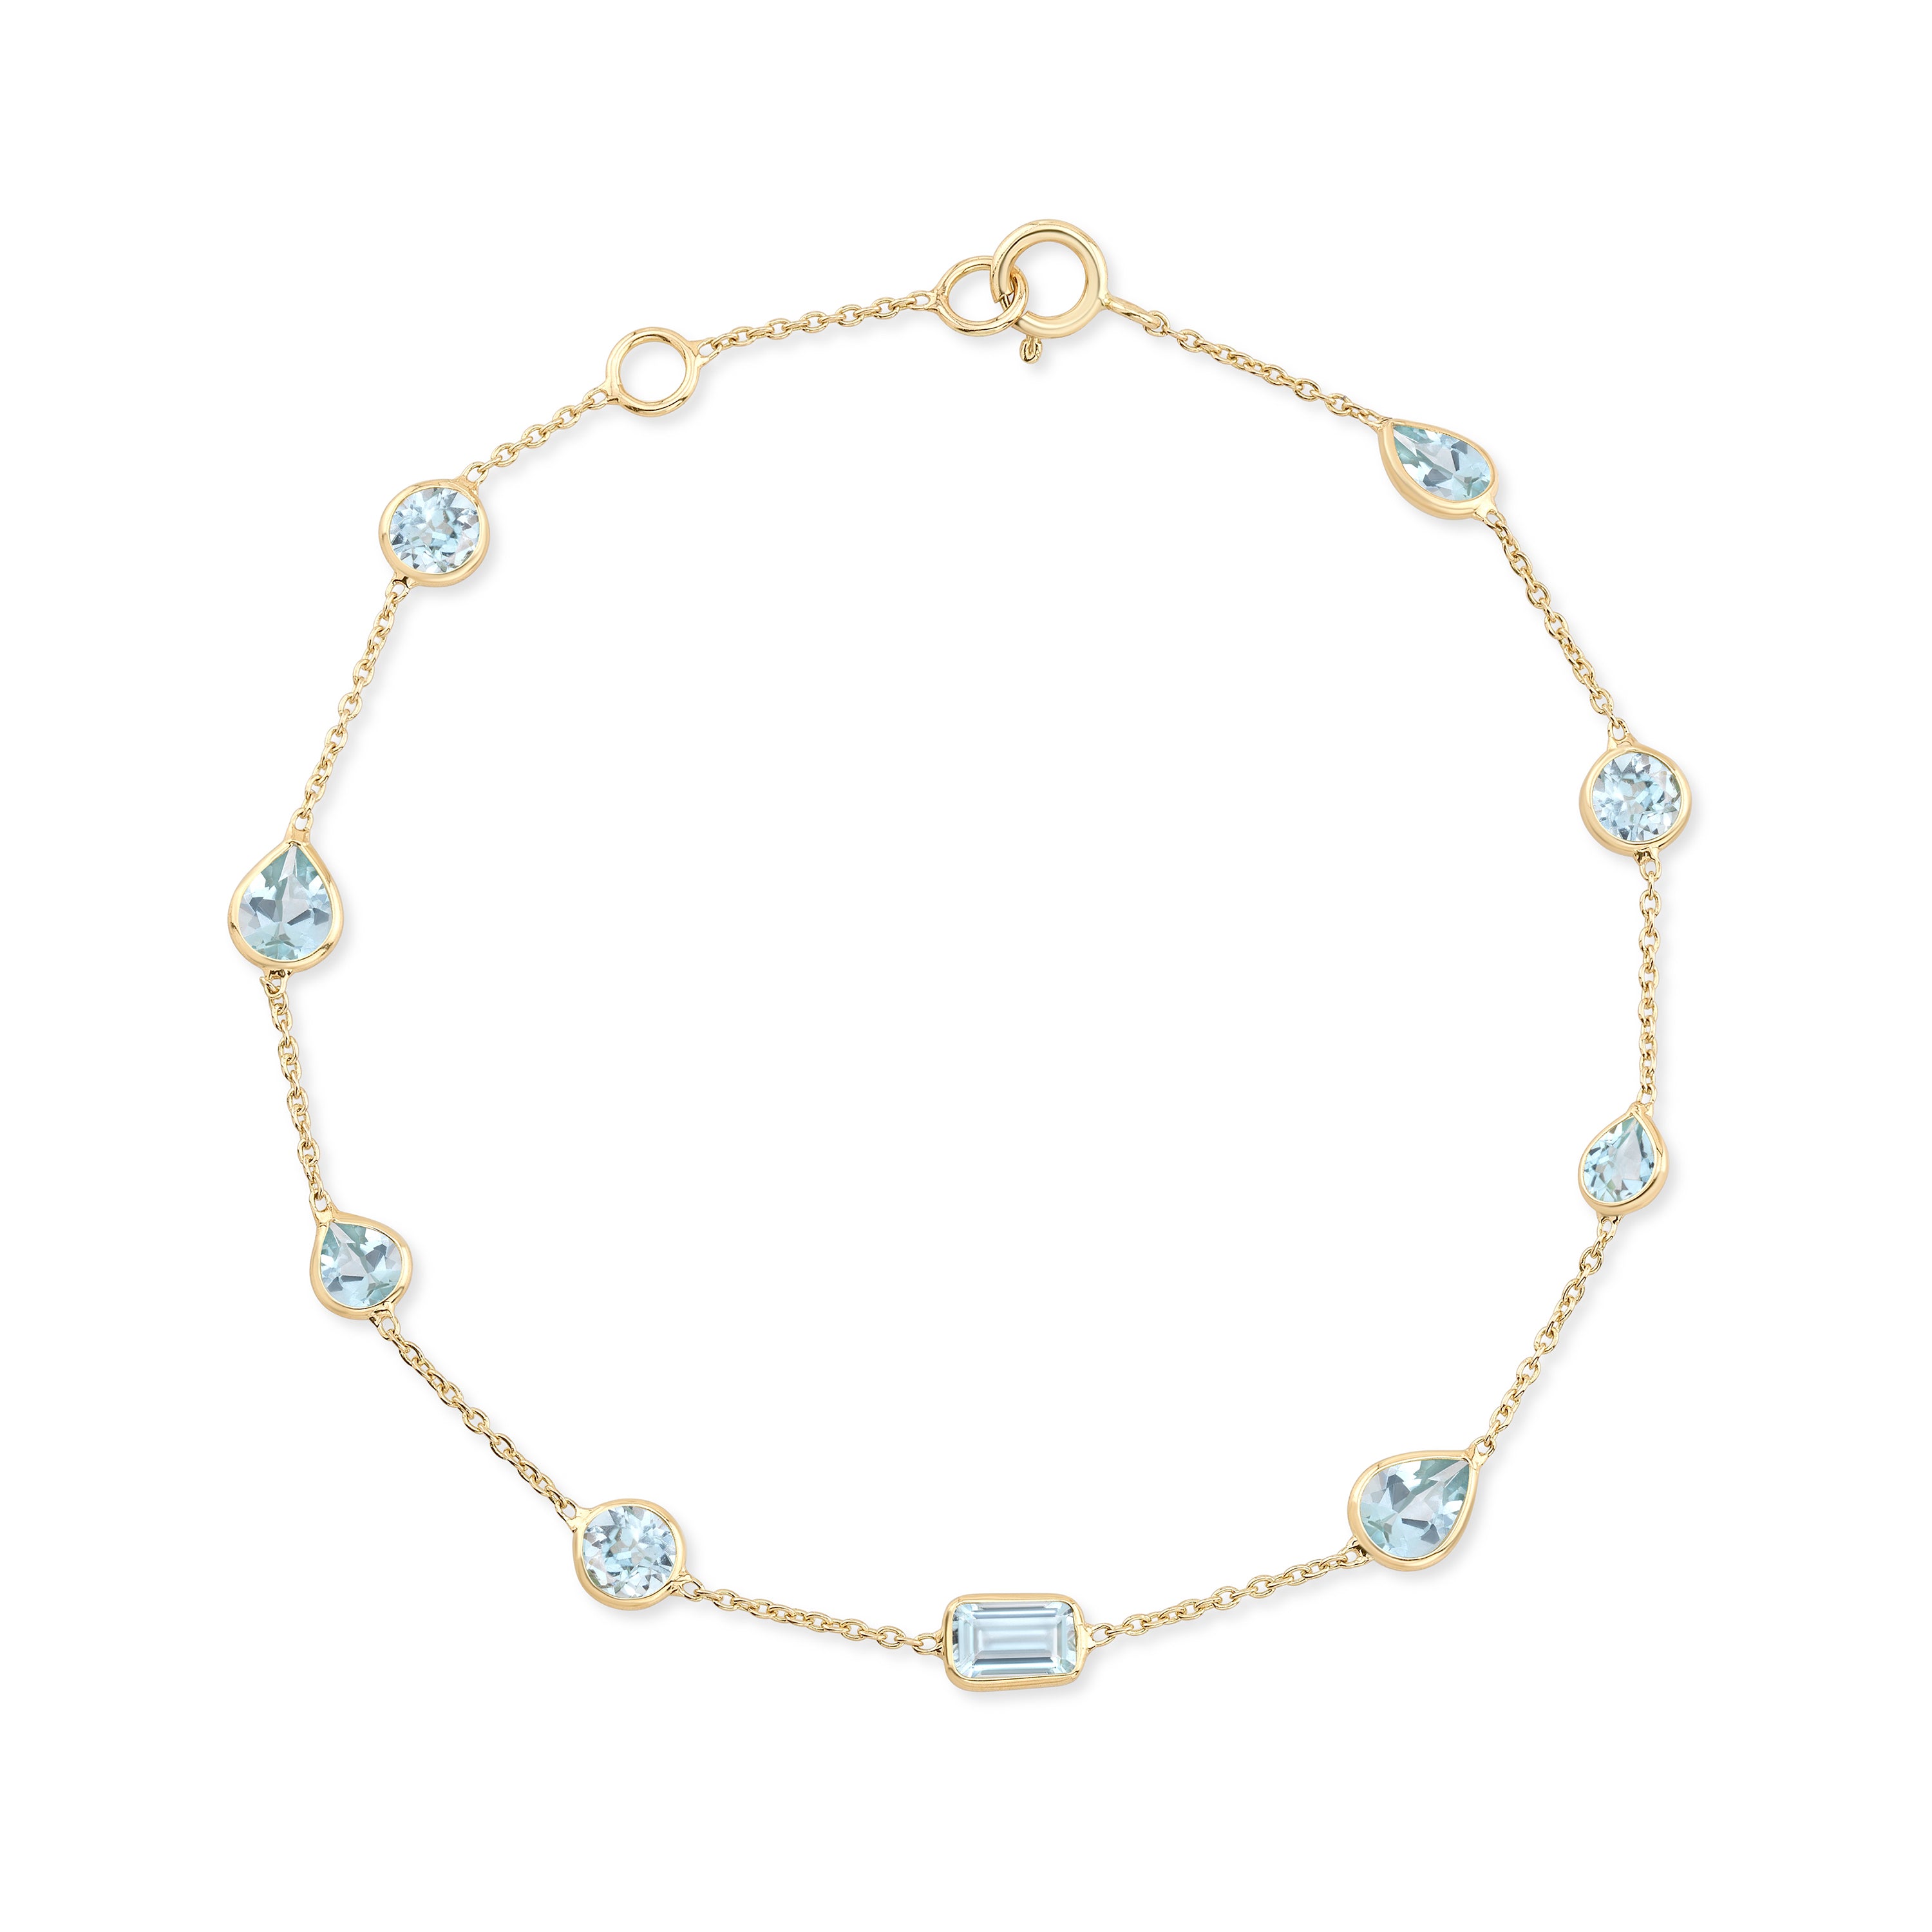 14ky gold bracelet with mixed shape Aquamarines. Shop March Birthstone with Carter Eve Jewelry.